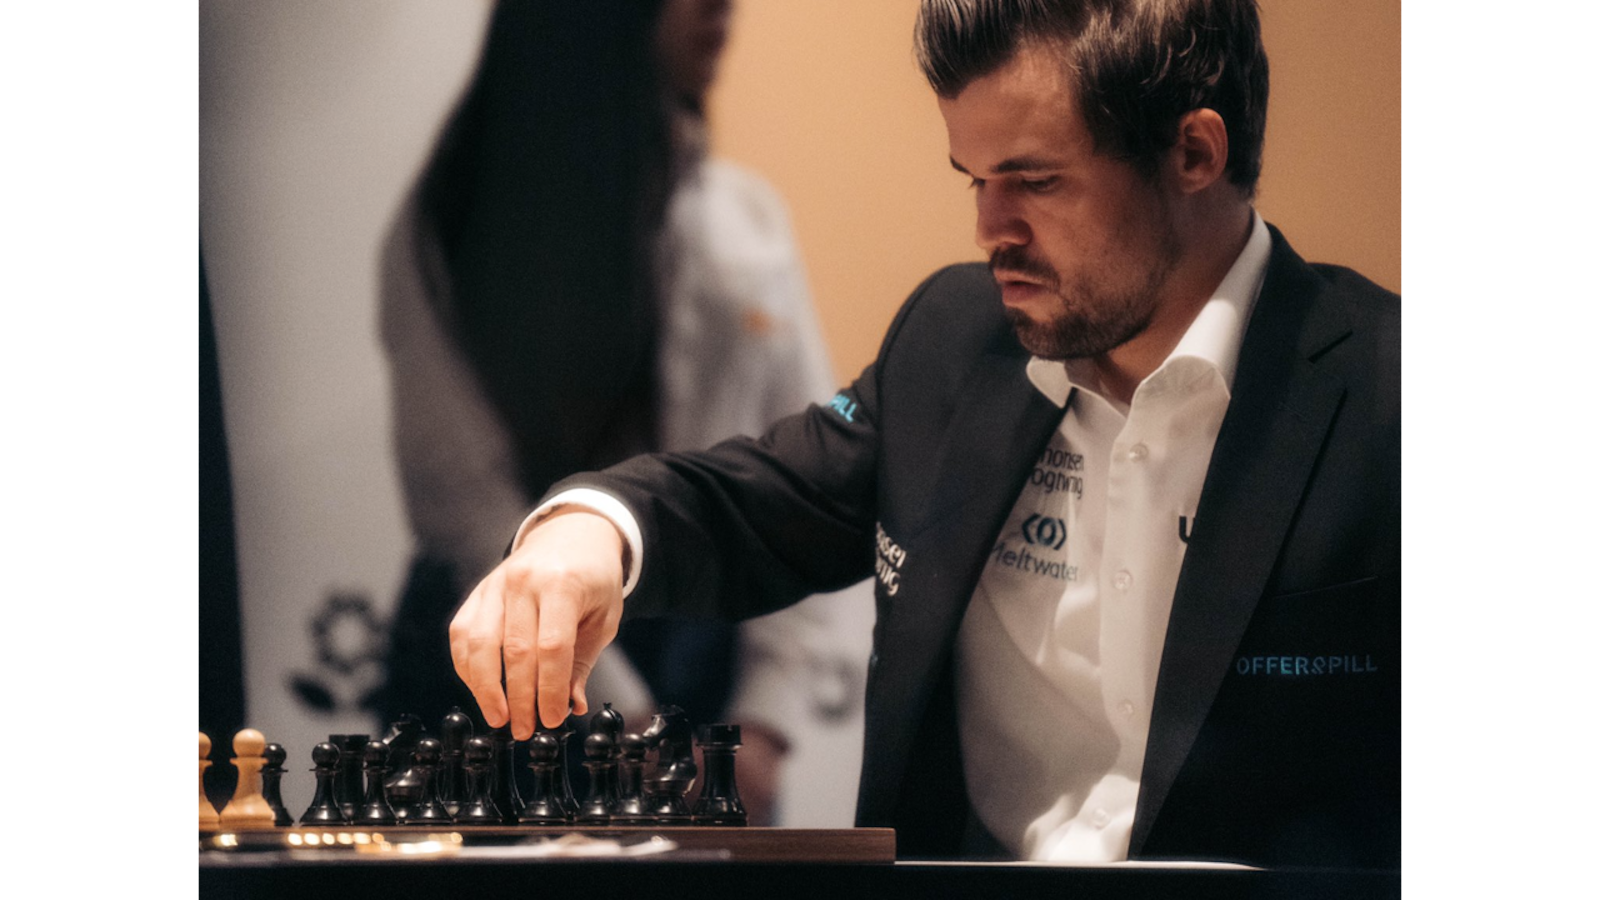 Chessgate: Grand Master Magnus Carlsen may have opened a can of worms when  he refused to play with Hans Niemann